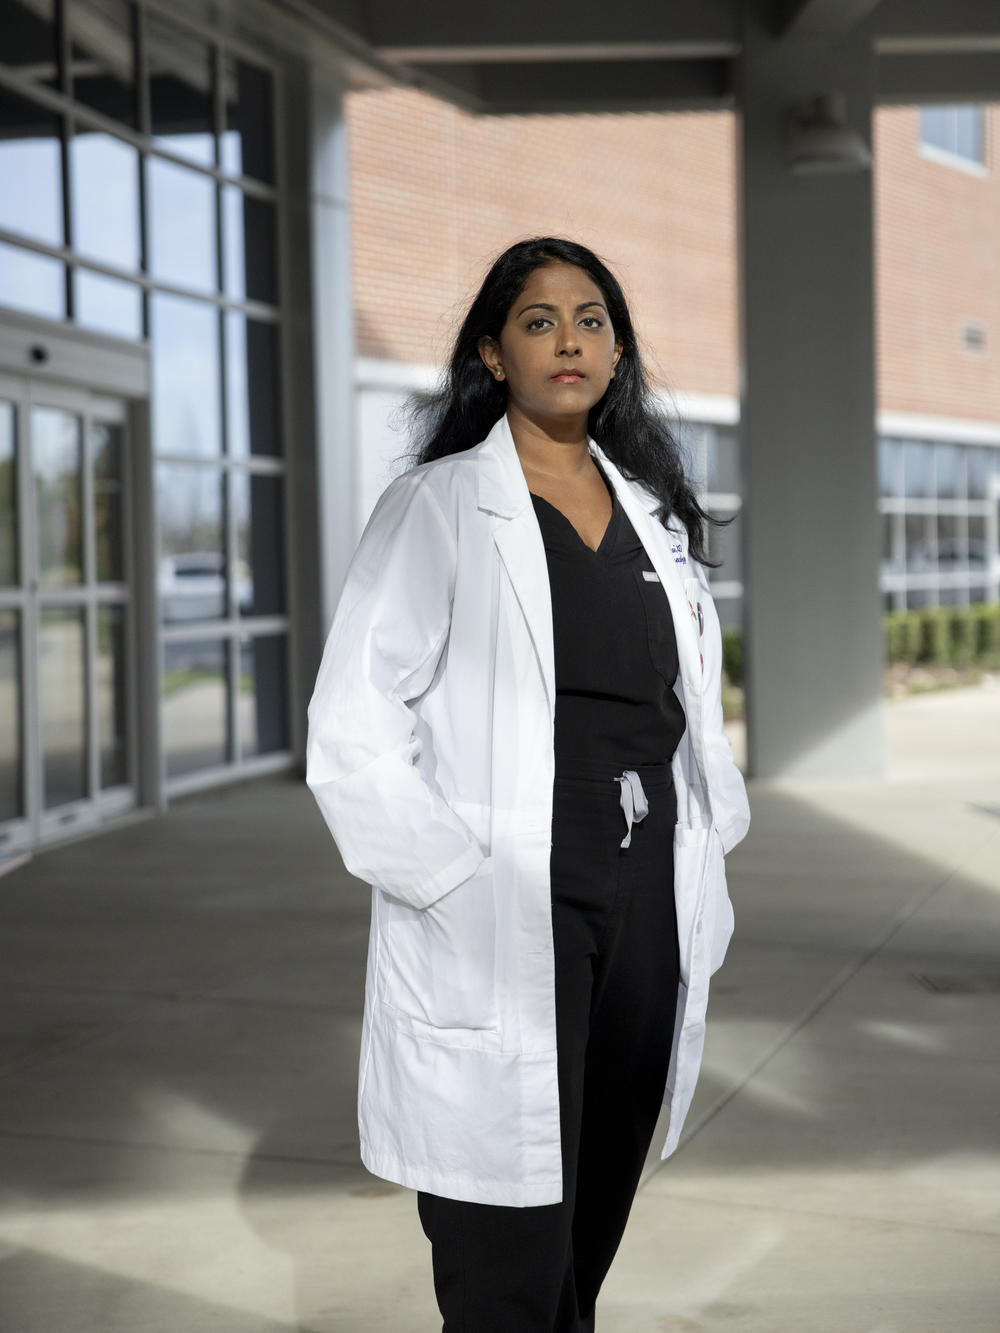 Sukhavasi, photographed in Baton Rouge, La. Monday, March 18, 2024, had a patient in her first trimester who came to the hospital bleeding and in pain. The patient wanted an abortion procedure called dilation and curettage, or D&C. 